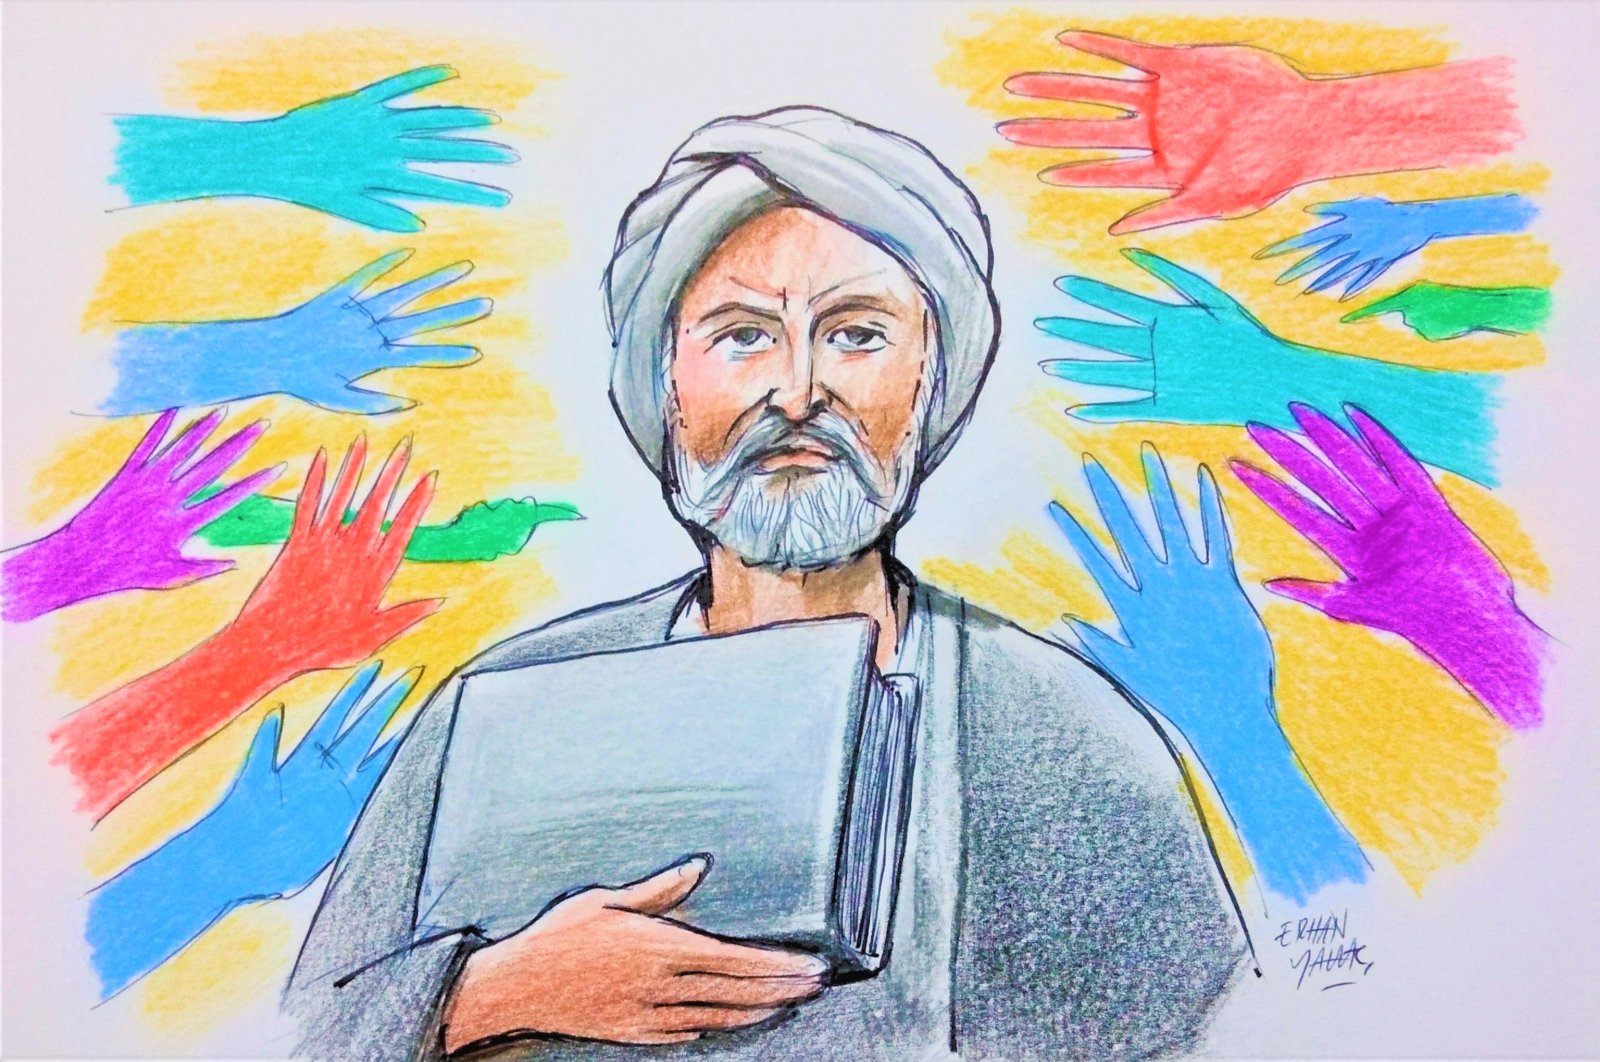 In Ibn Khaldun&#039;s system of thought, the state exists to protect individuals and guarantee them justice, order and security in social life. (Illustration by Erhan Yalvaç)